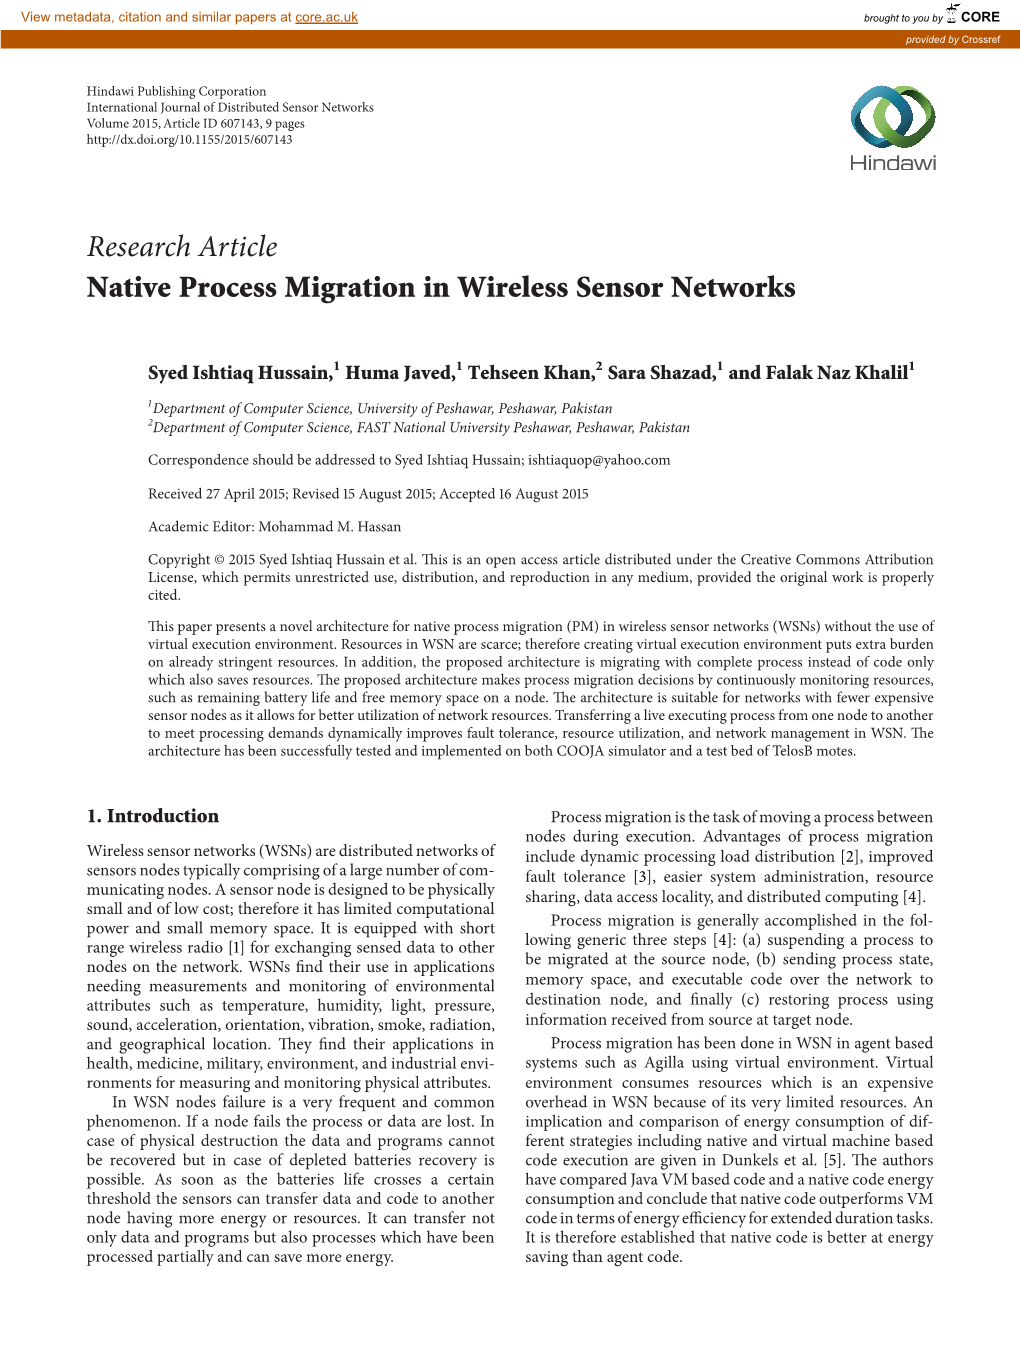 Research Article Native Process Migration in Wireless Sensor Networks